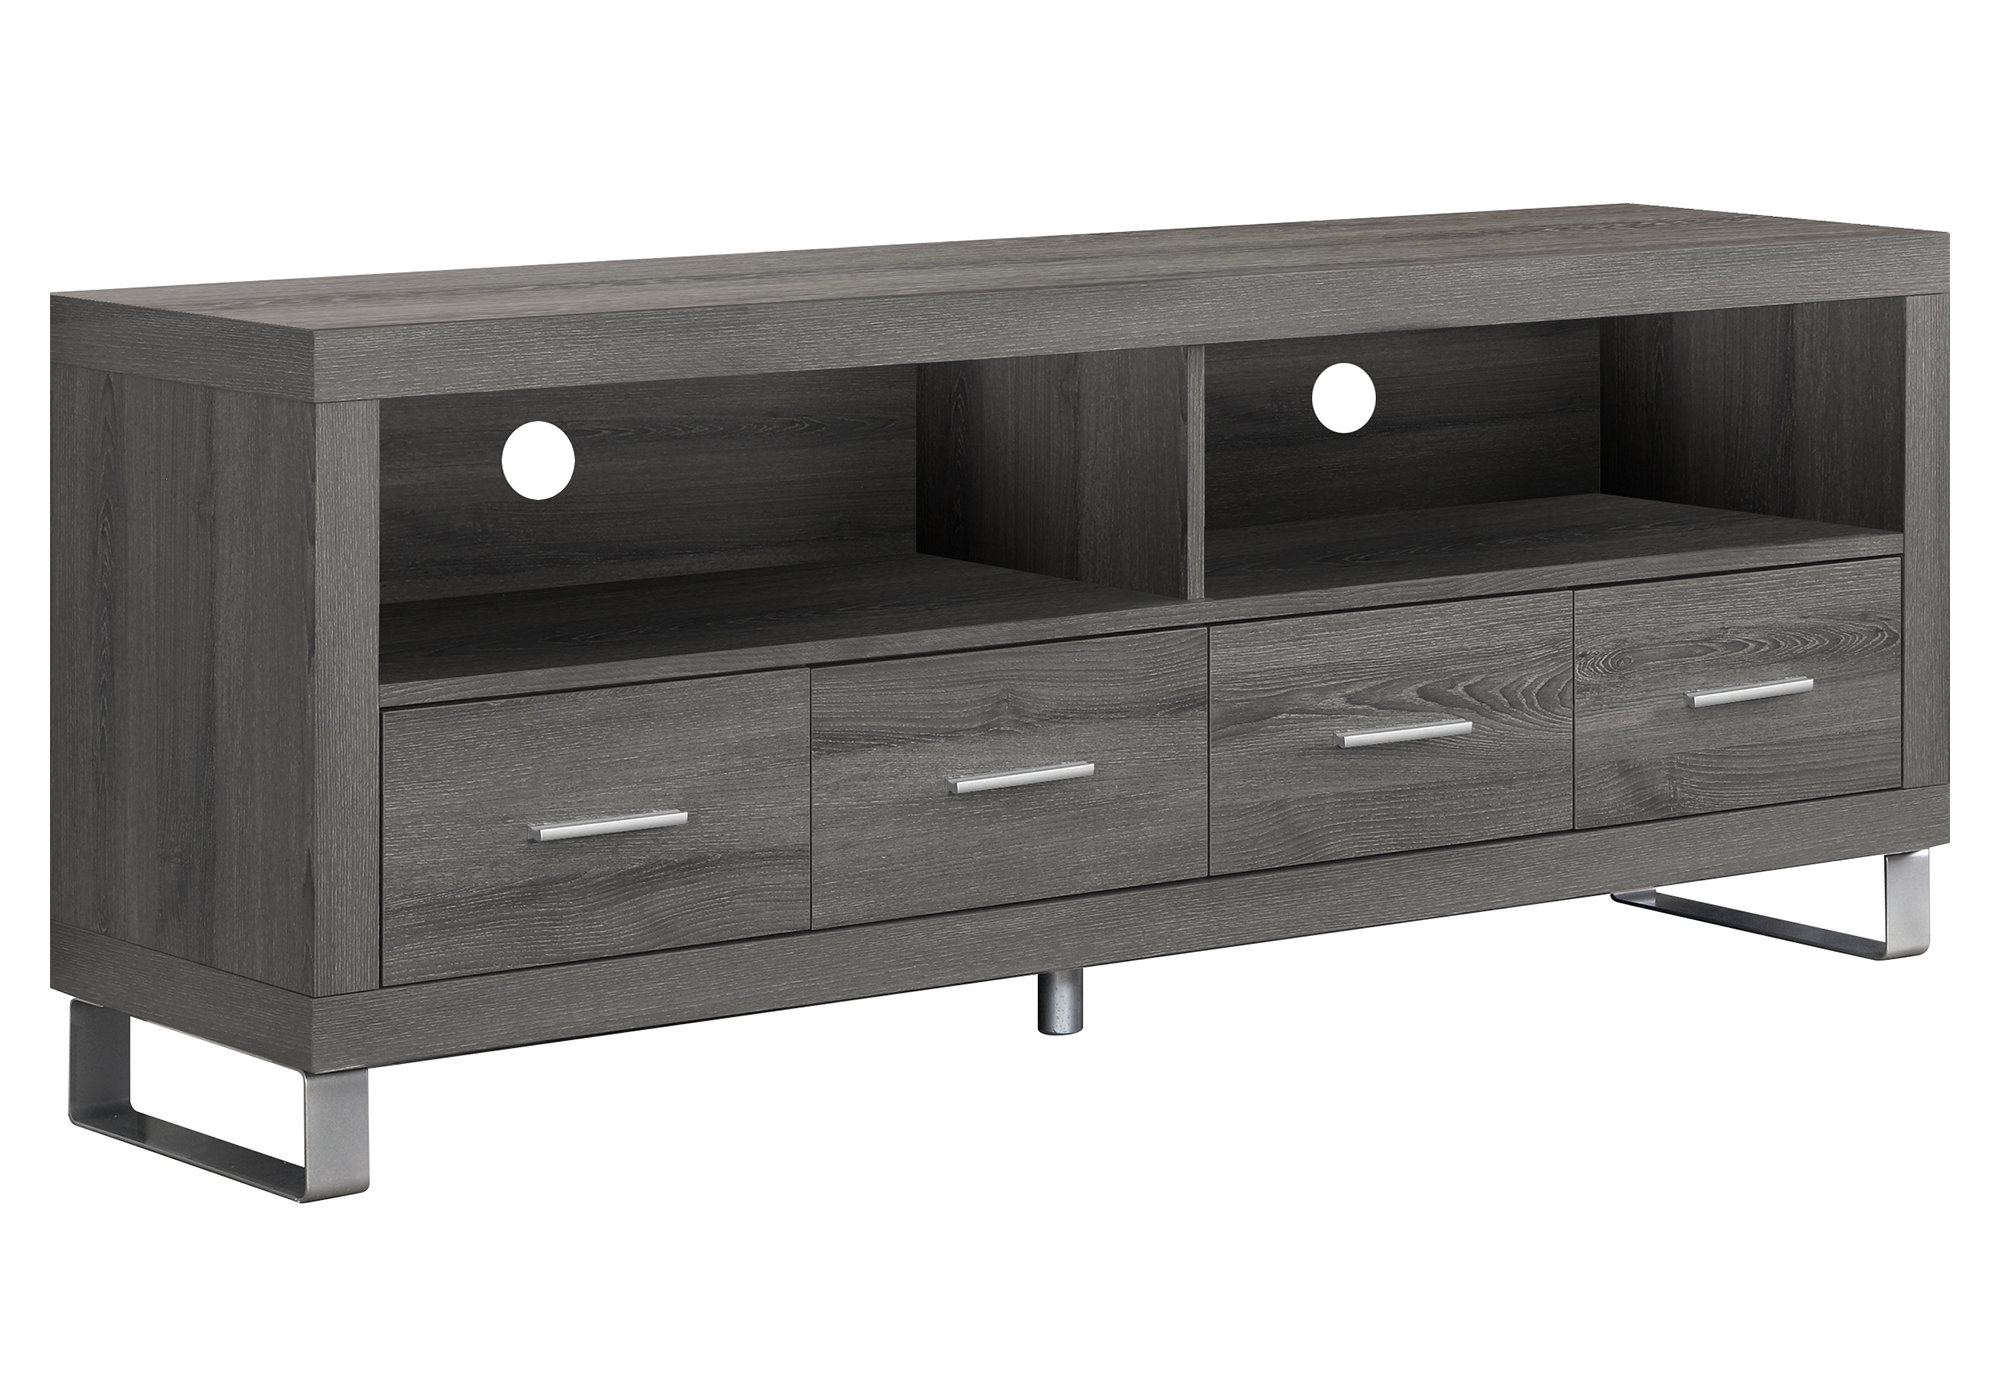 15.75" x 60" x 23.75" Dark Taupe Silver Particle Board Hollow Core Metal TV Stand With 4 Drawers